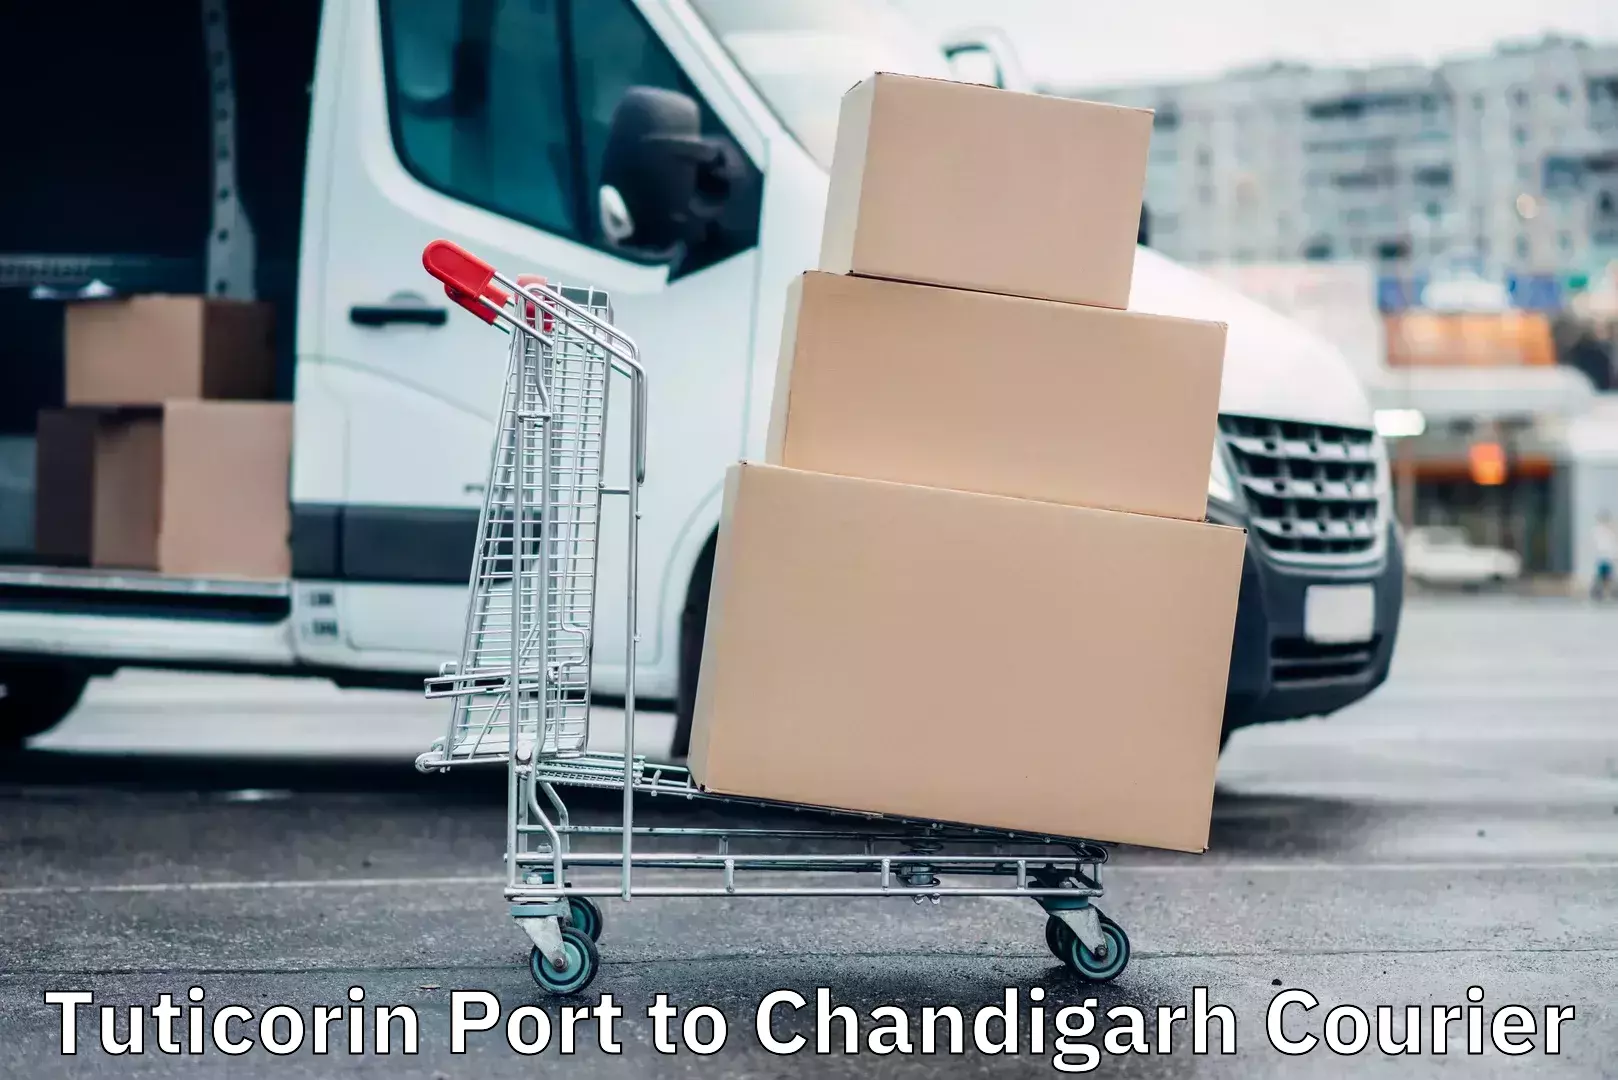 Global parcel delivery Tuticorin Port to Chandigarh